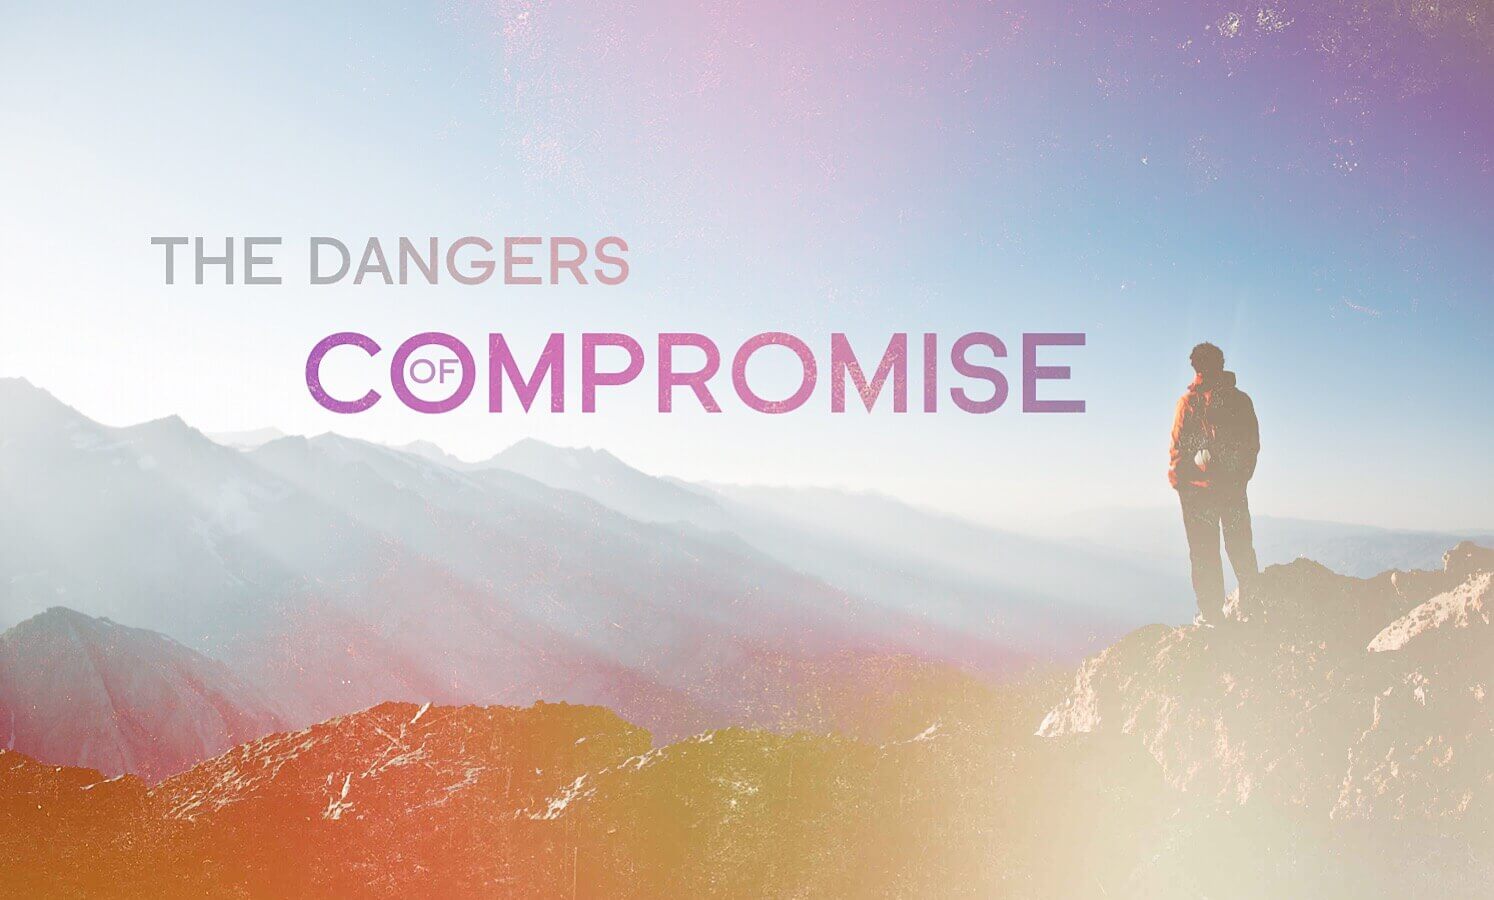 The dangers of compromise